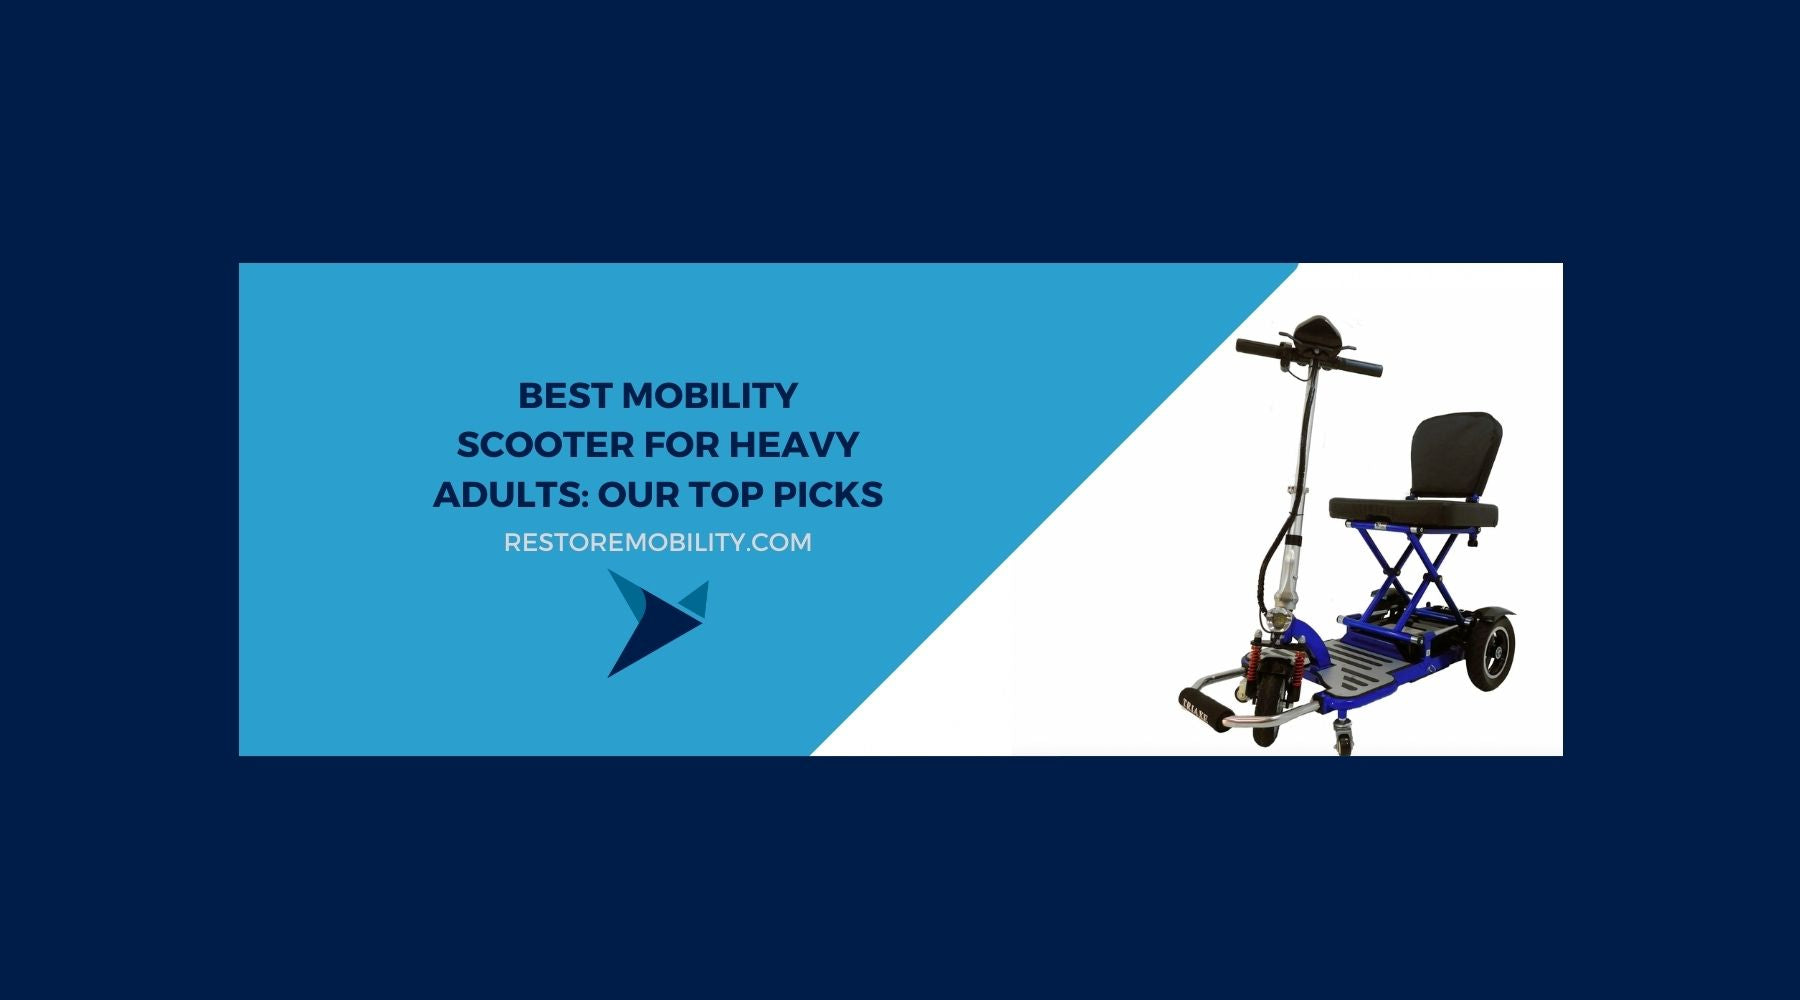 Best Mobility Scooter for Heavy Adults: Our Top Picks